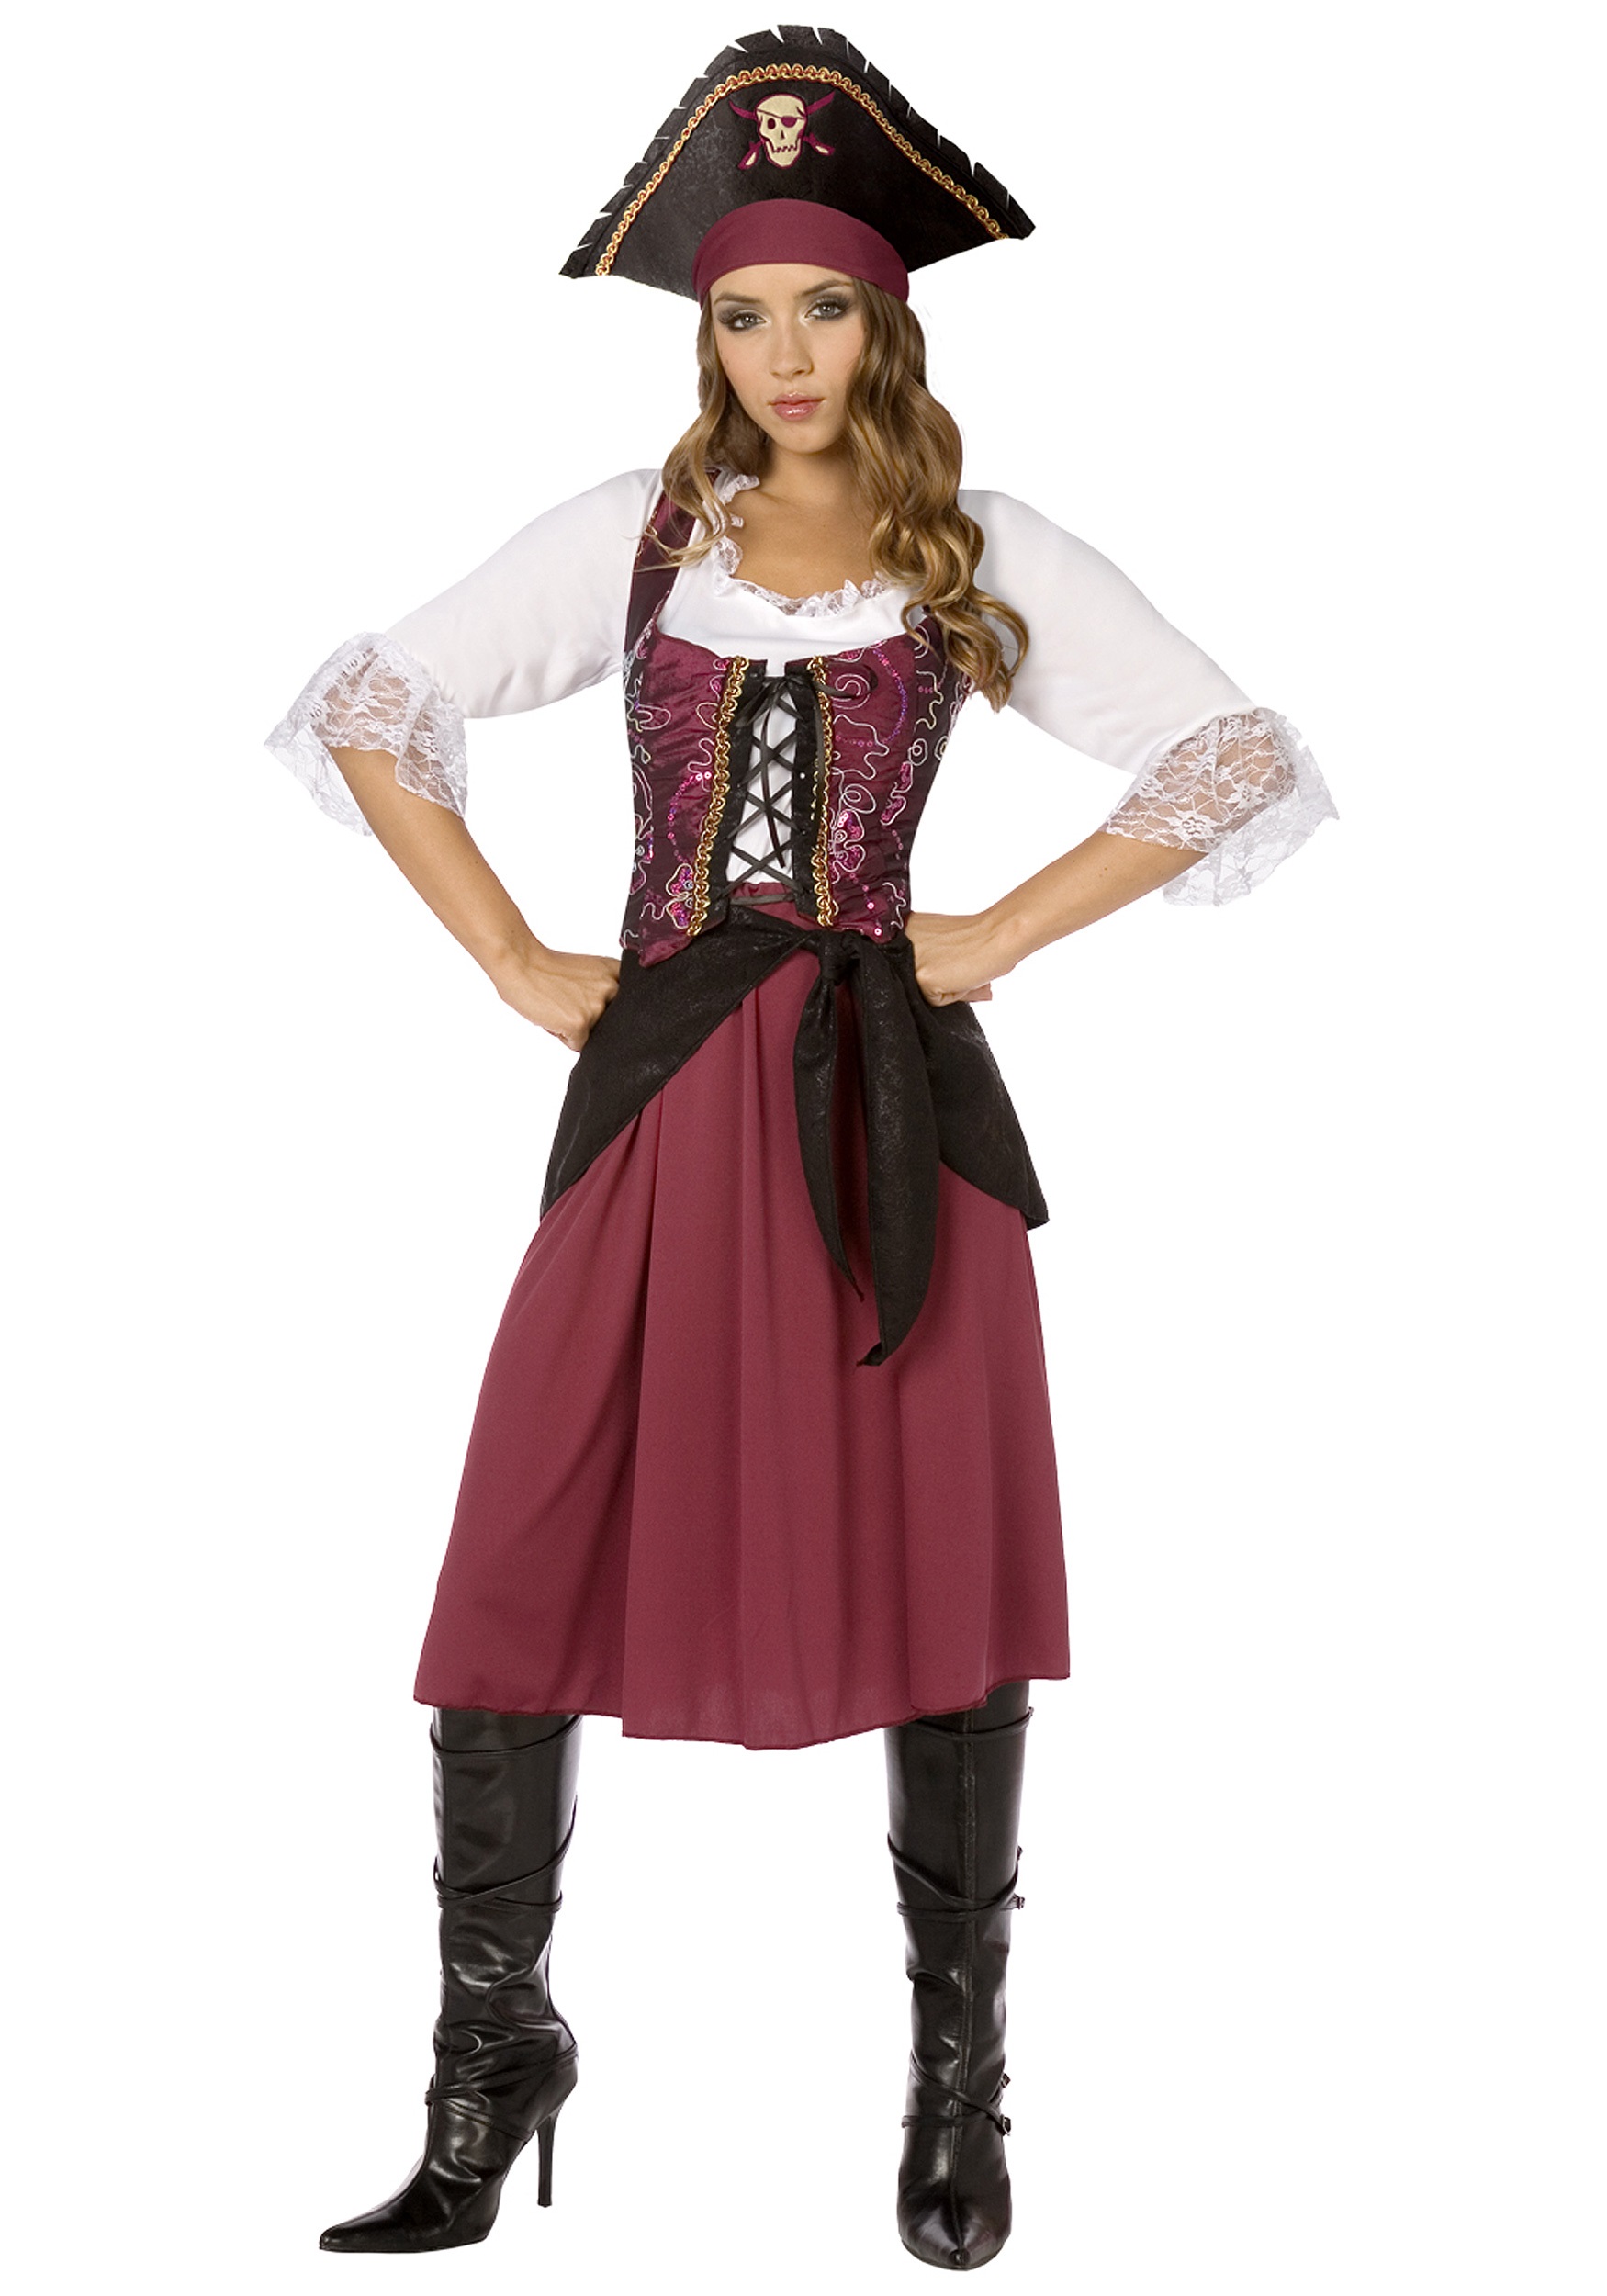 FANCY DRESS COSTUME # ADULT PIRATE WOMAN BUCCANEER WENCH SIZE 8-26